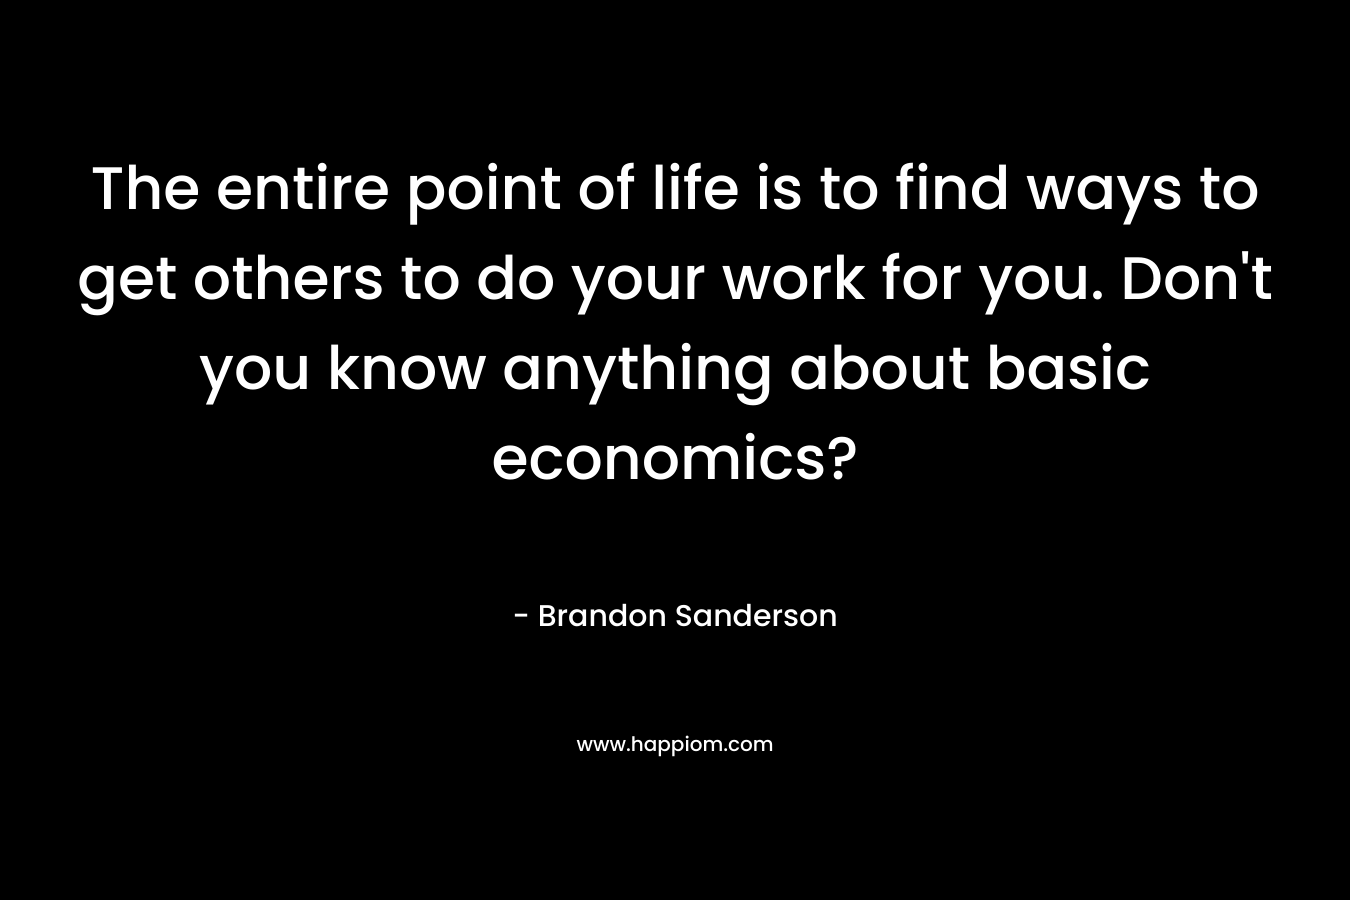 The entire point of life is to find ways to get others to do your work for you. Don’t you know anything about basic economics? – Brandon Sanderson